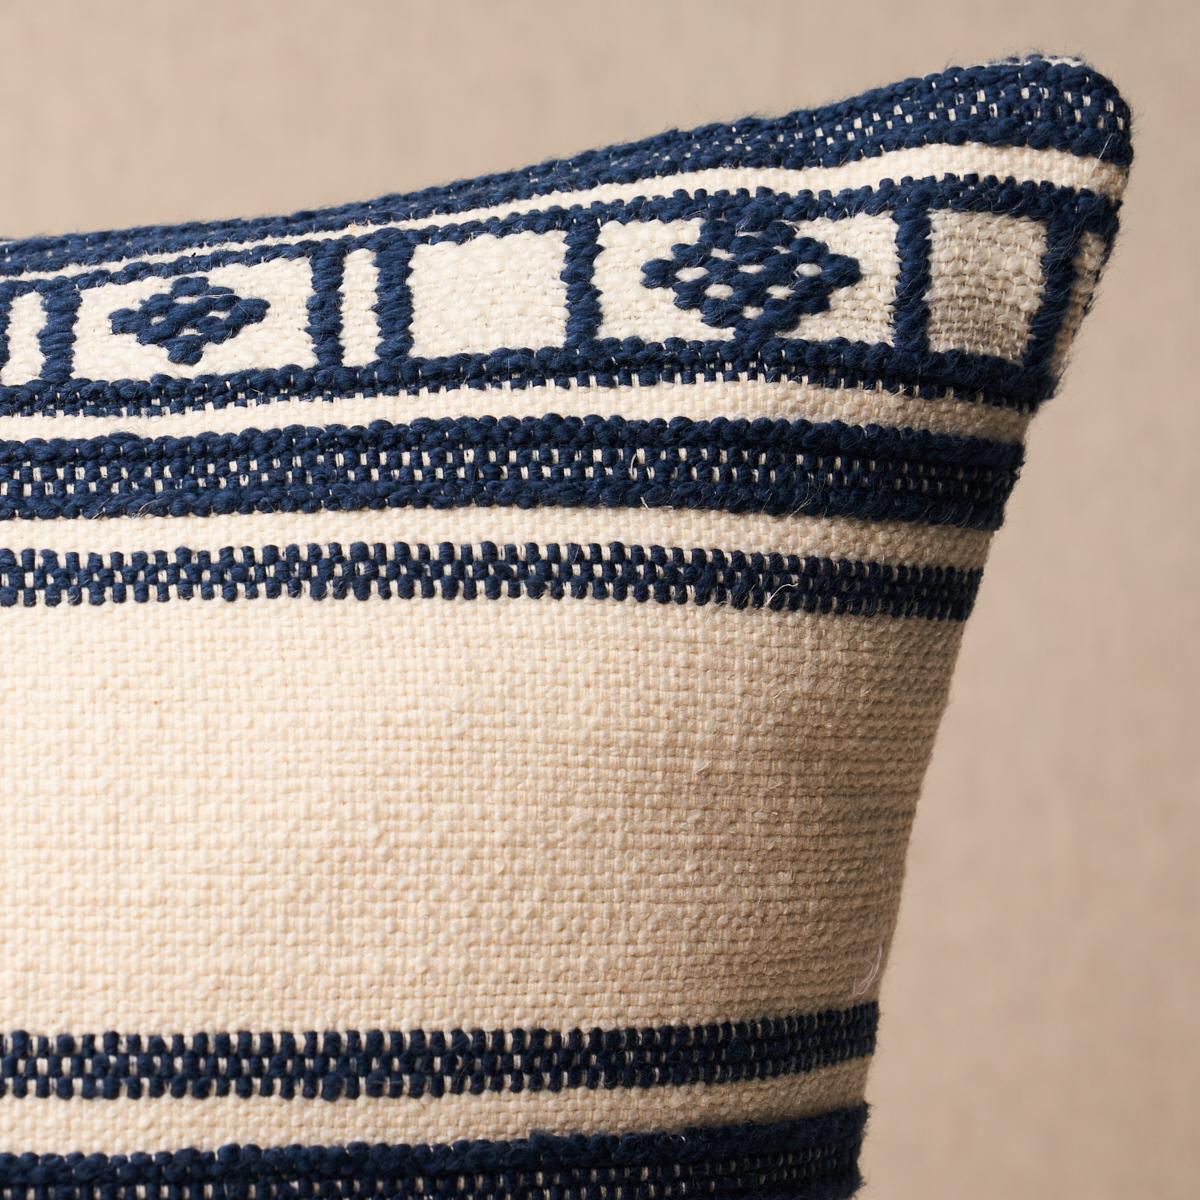 This pillow features Buena Vista with a knife edge finish. A wonderful, blanket-like woven stripe that's simple yet sophisticated, Buena Vista in indigo has a lovely hand and homespun appeal. Pillow includes a feather/down fill insert and hidden